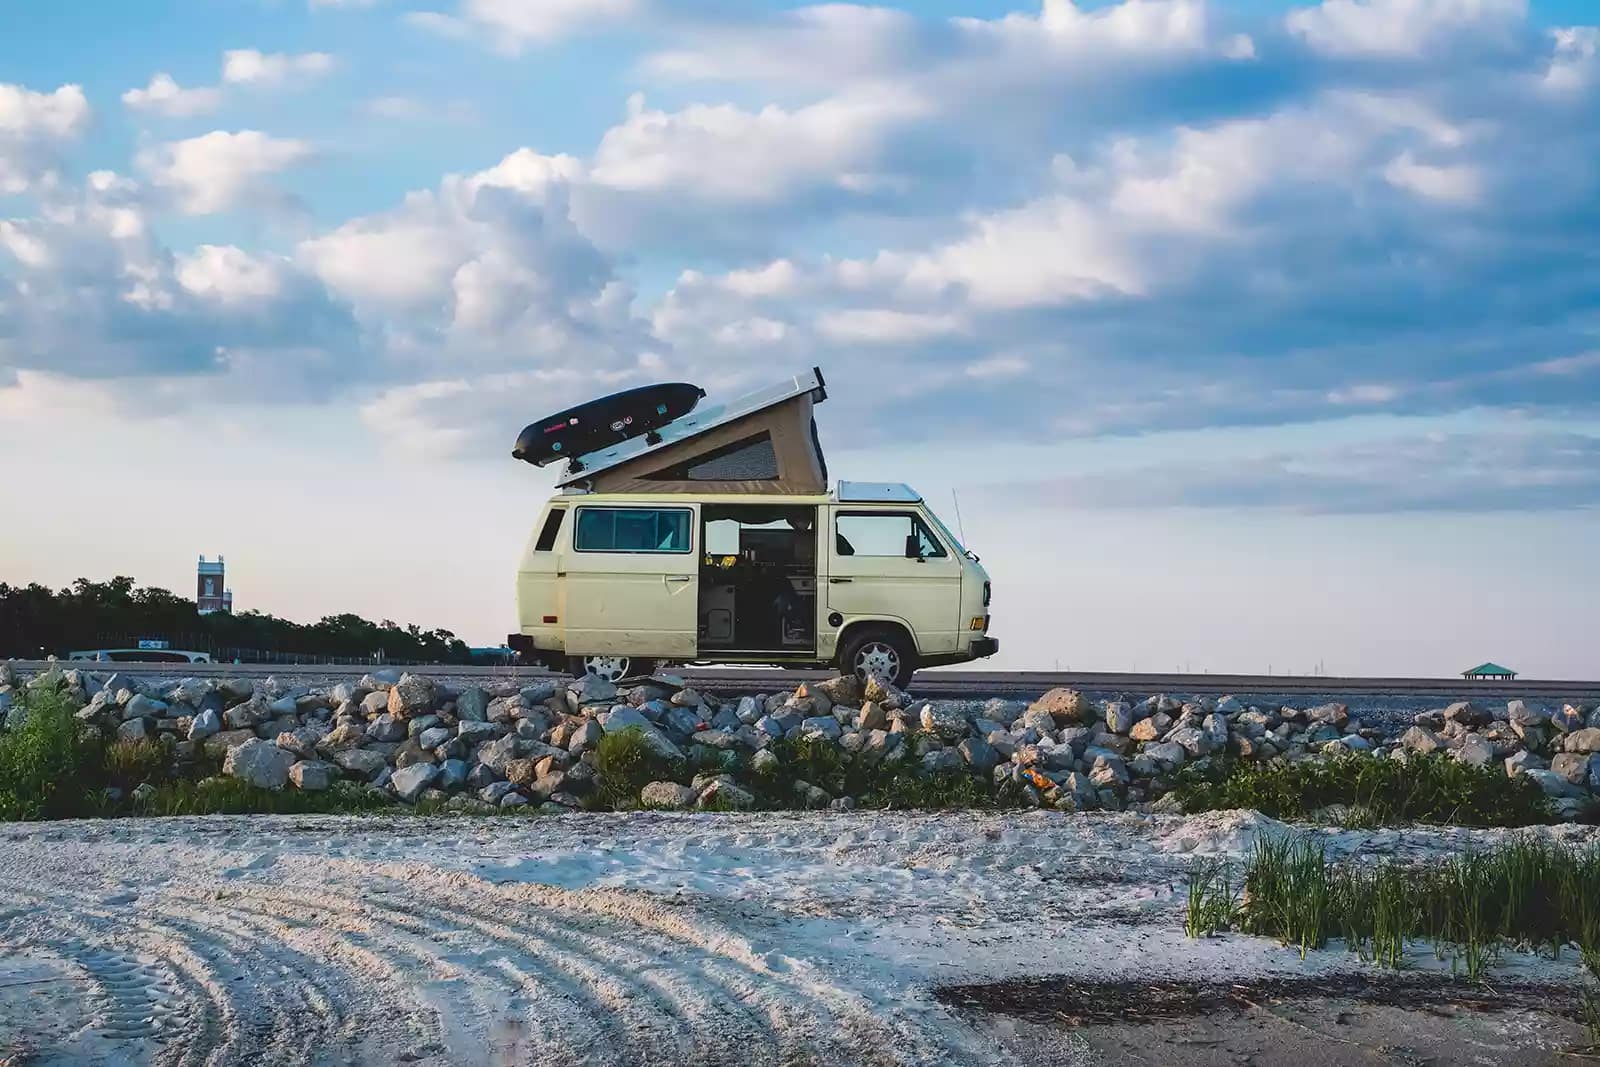 A pop-up camper van with an open side door is set up for camping on a beach in Florida.